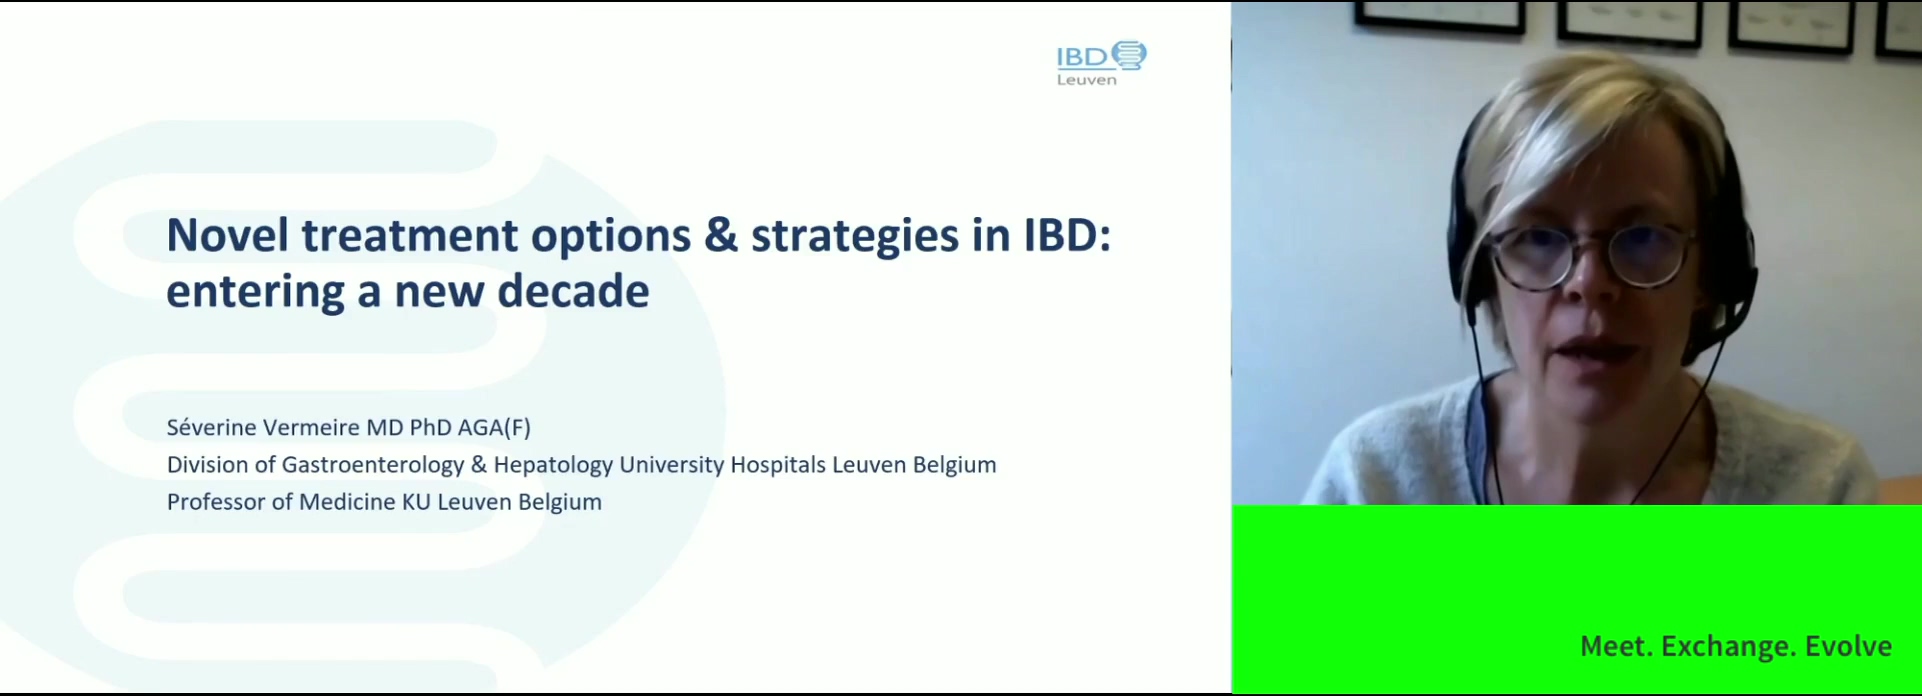 Novel treatment option and strategies in IBD: Entering a new decade